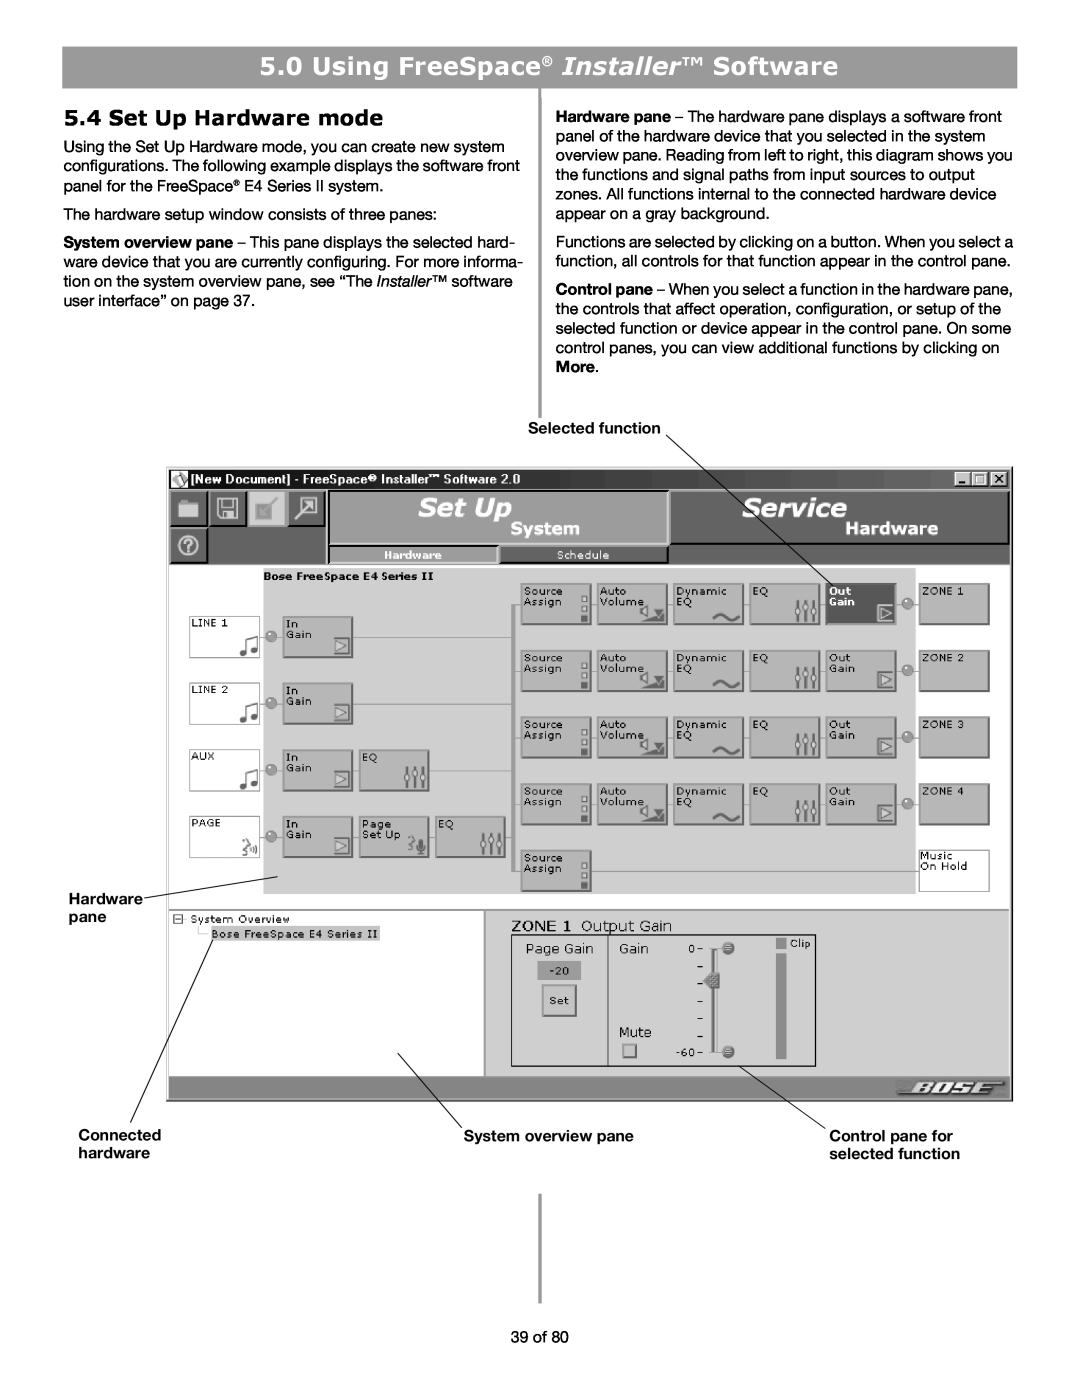 Bose E4 Set Up Hardware mode, Using FreeSpace Installer Software, Hardware pane, Selected function, Connected, hardware 